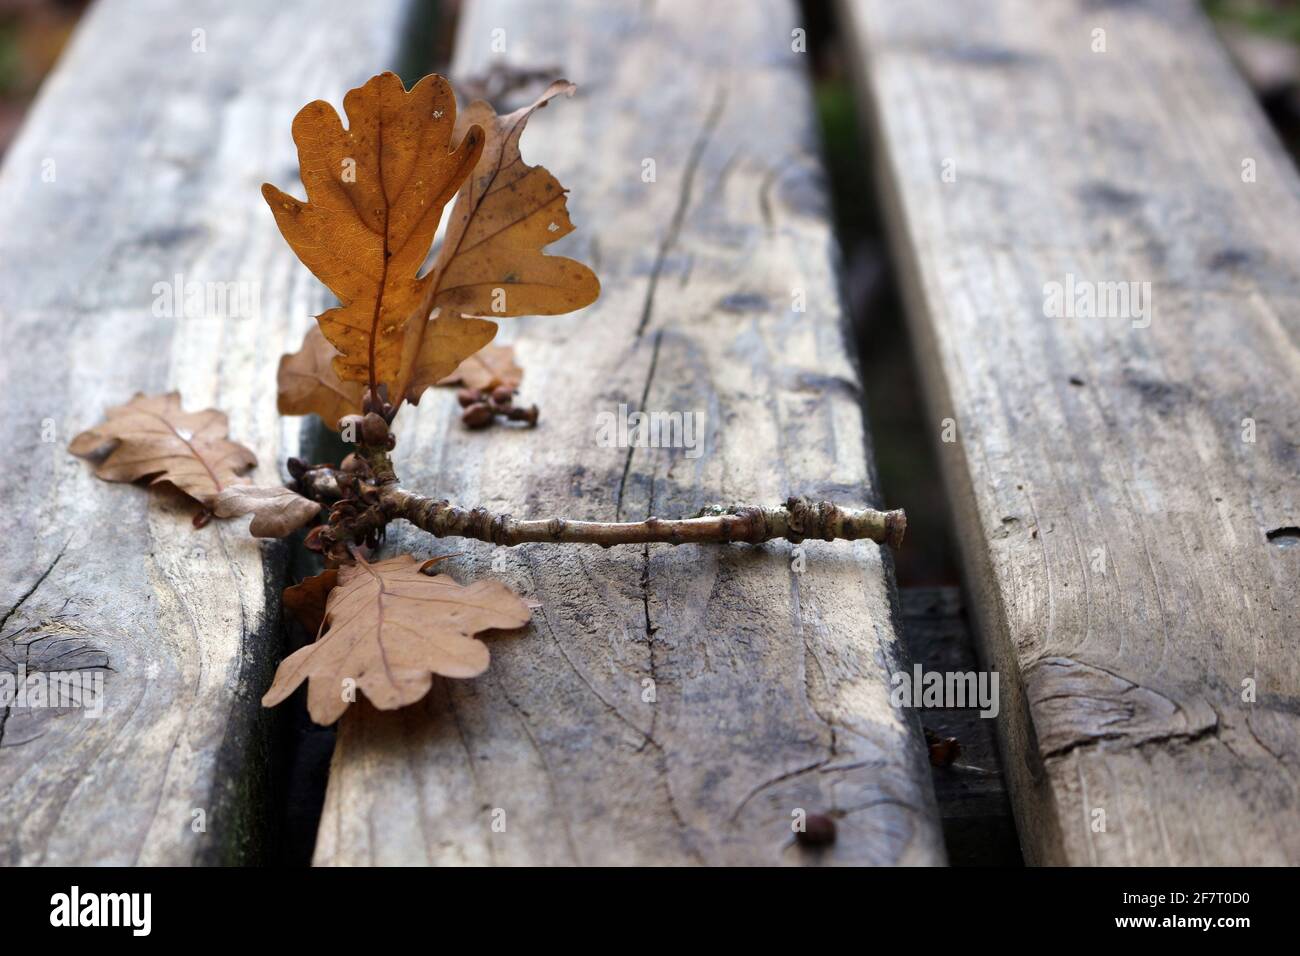 An Oak twig on an outdoor table in Autumn Stock Photo